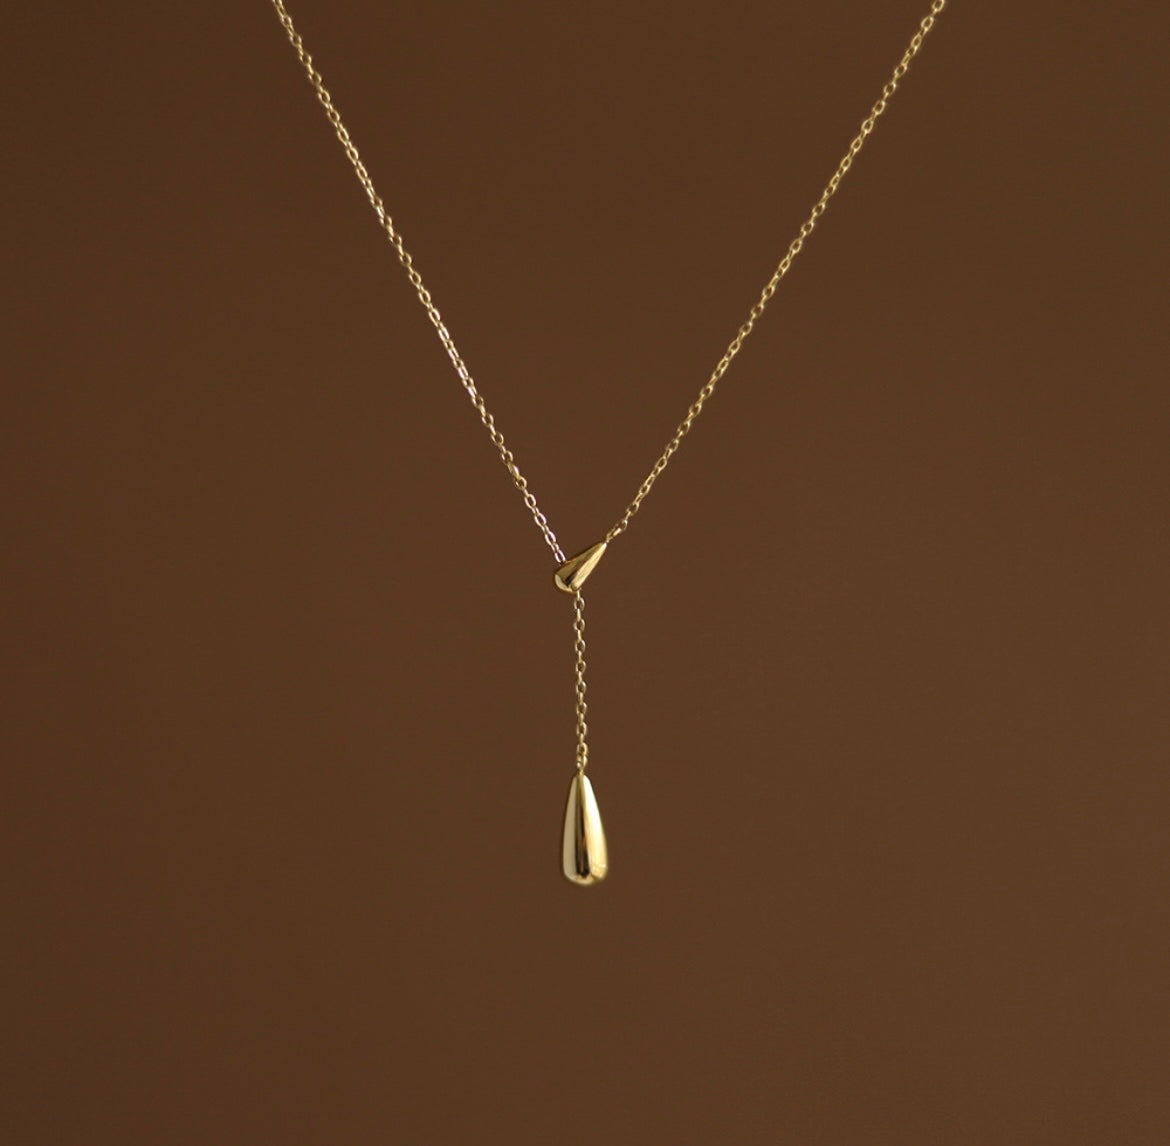 Water droplets necklace